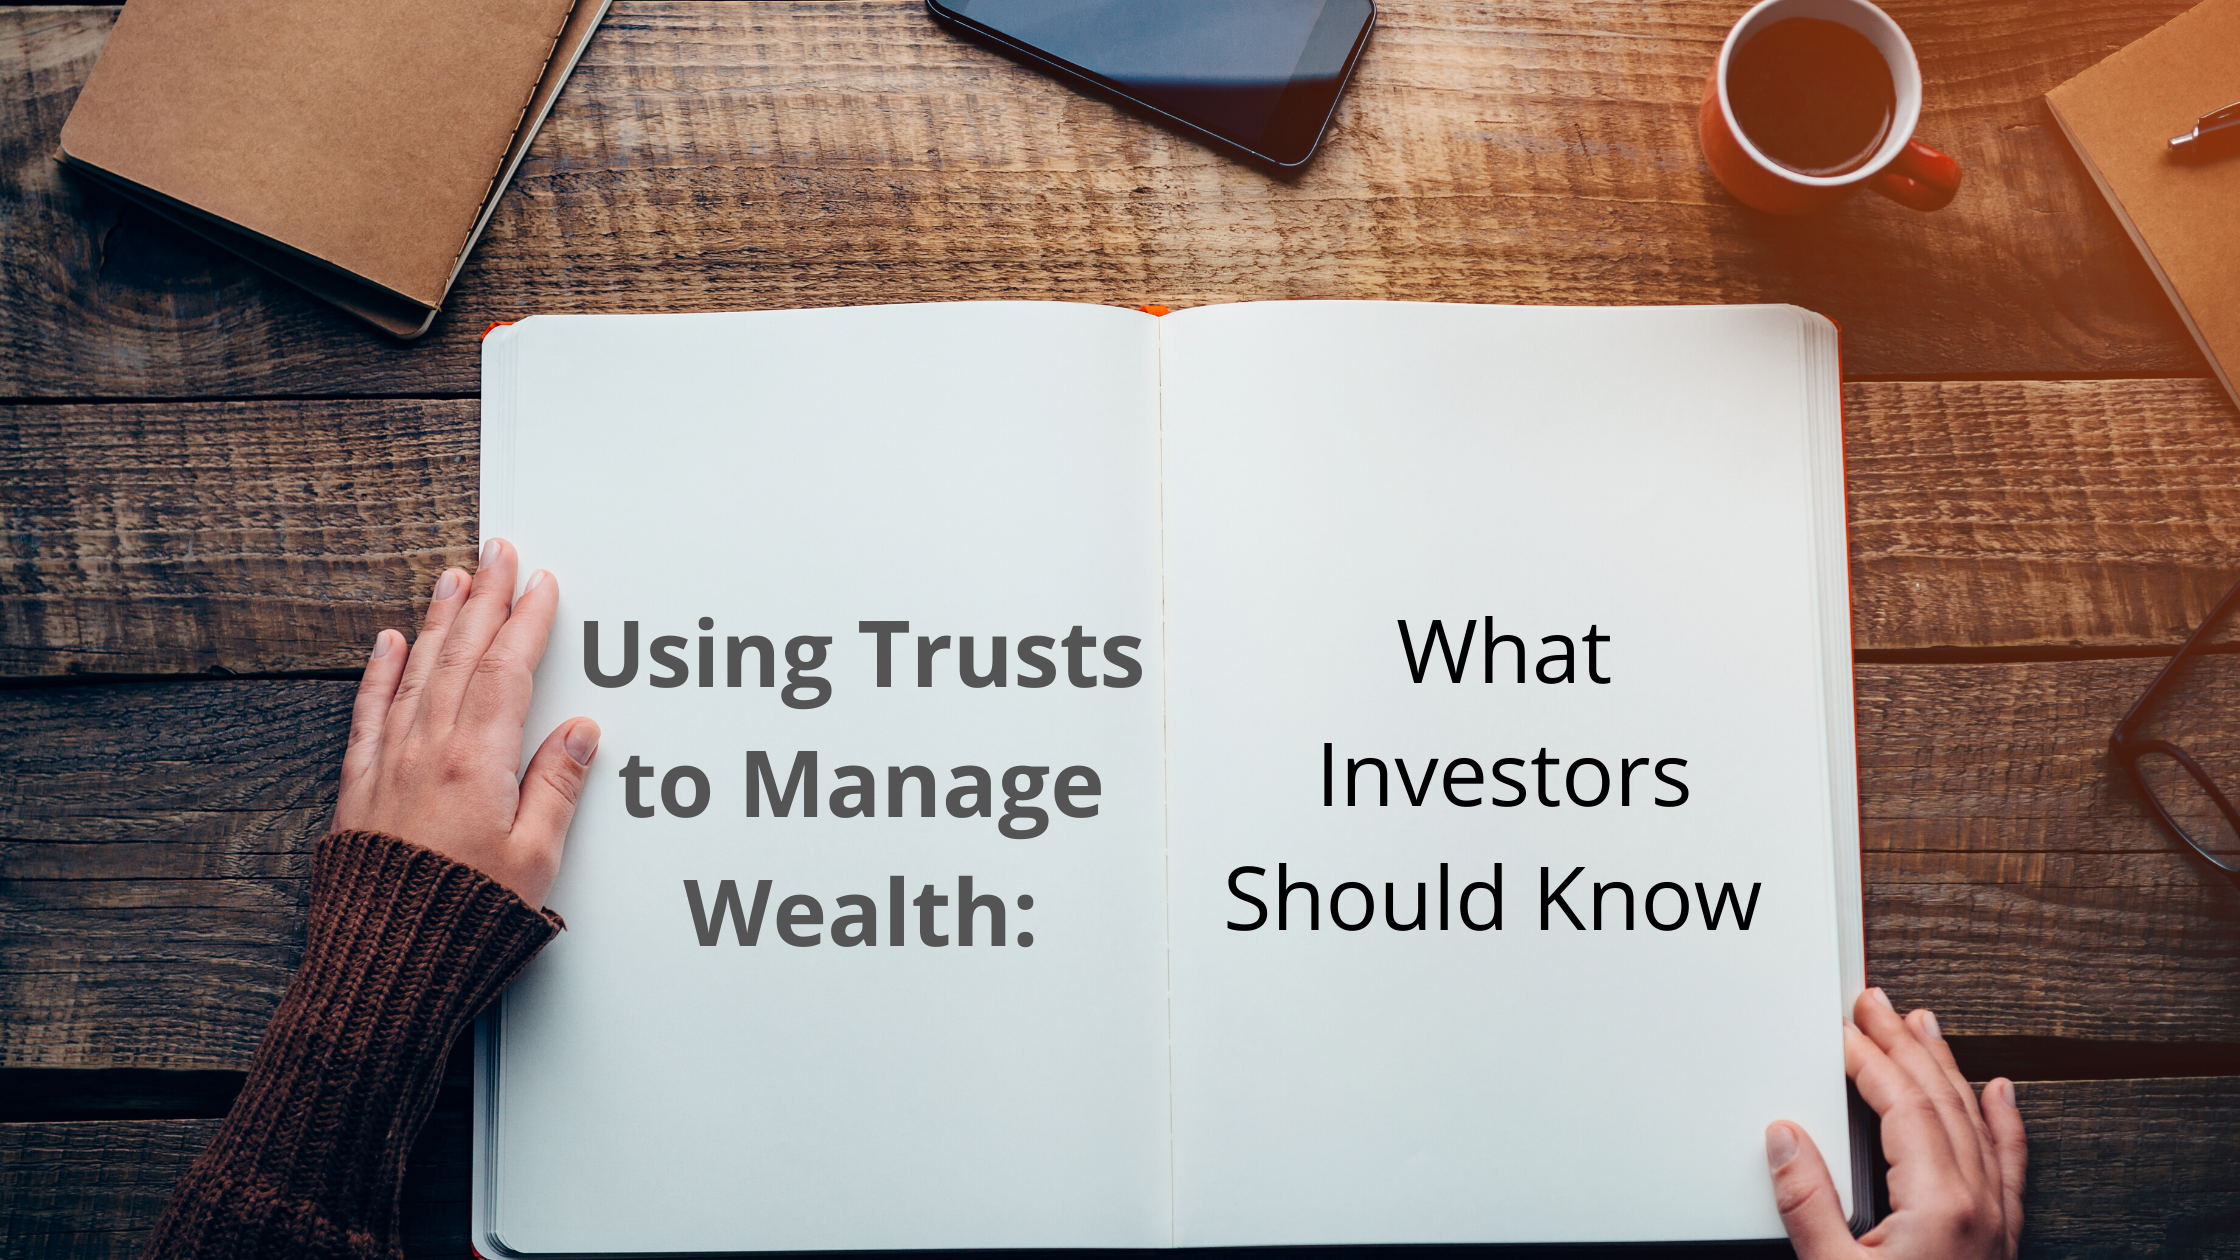 Using Trusts to Manage Wealth: What Investors Should Know